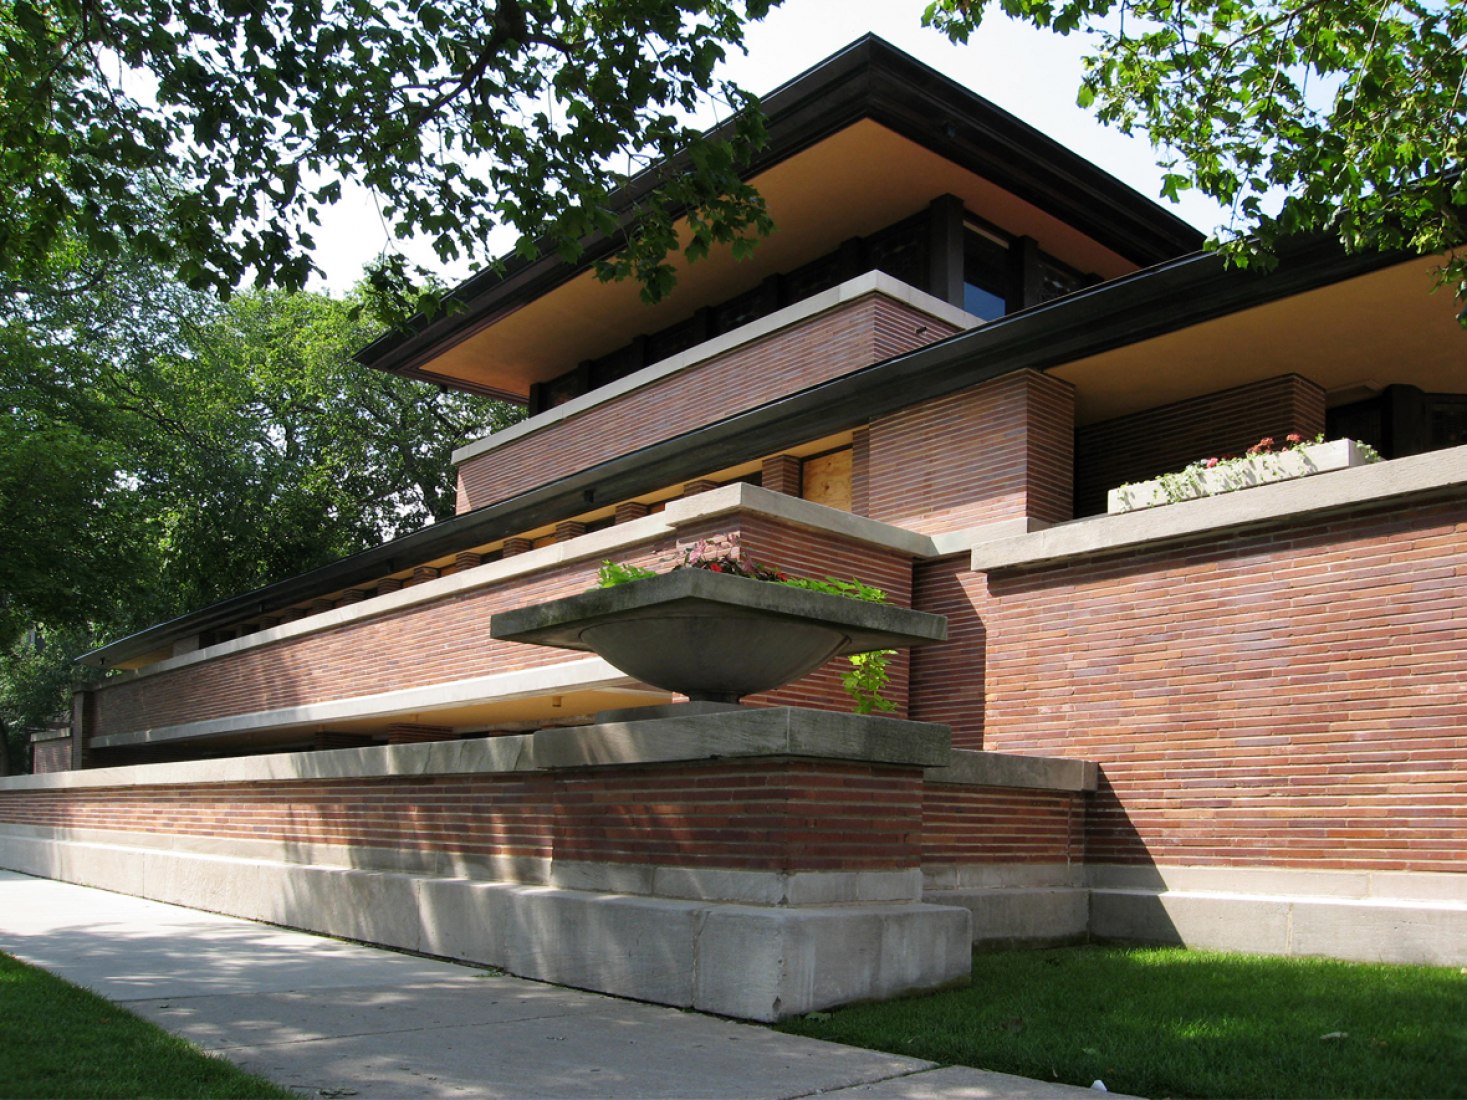 Exterior view. The best example of the Prairie Houses, the Robie House, 1908-1910. Photography © Wikipedia.